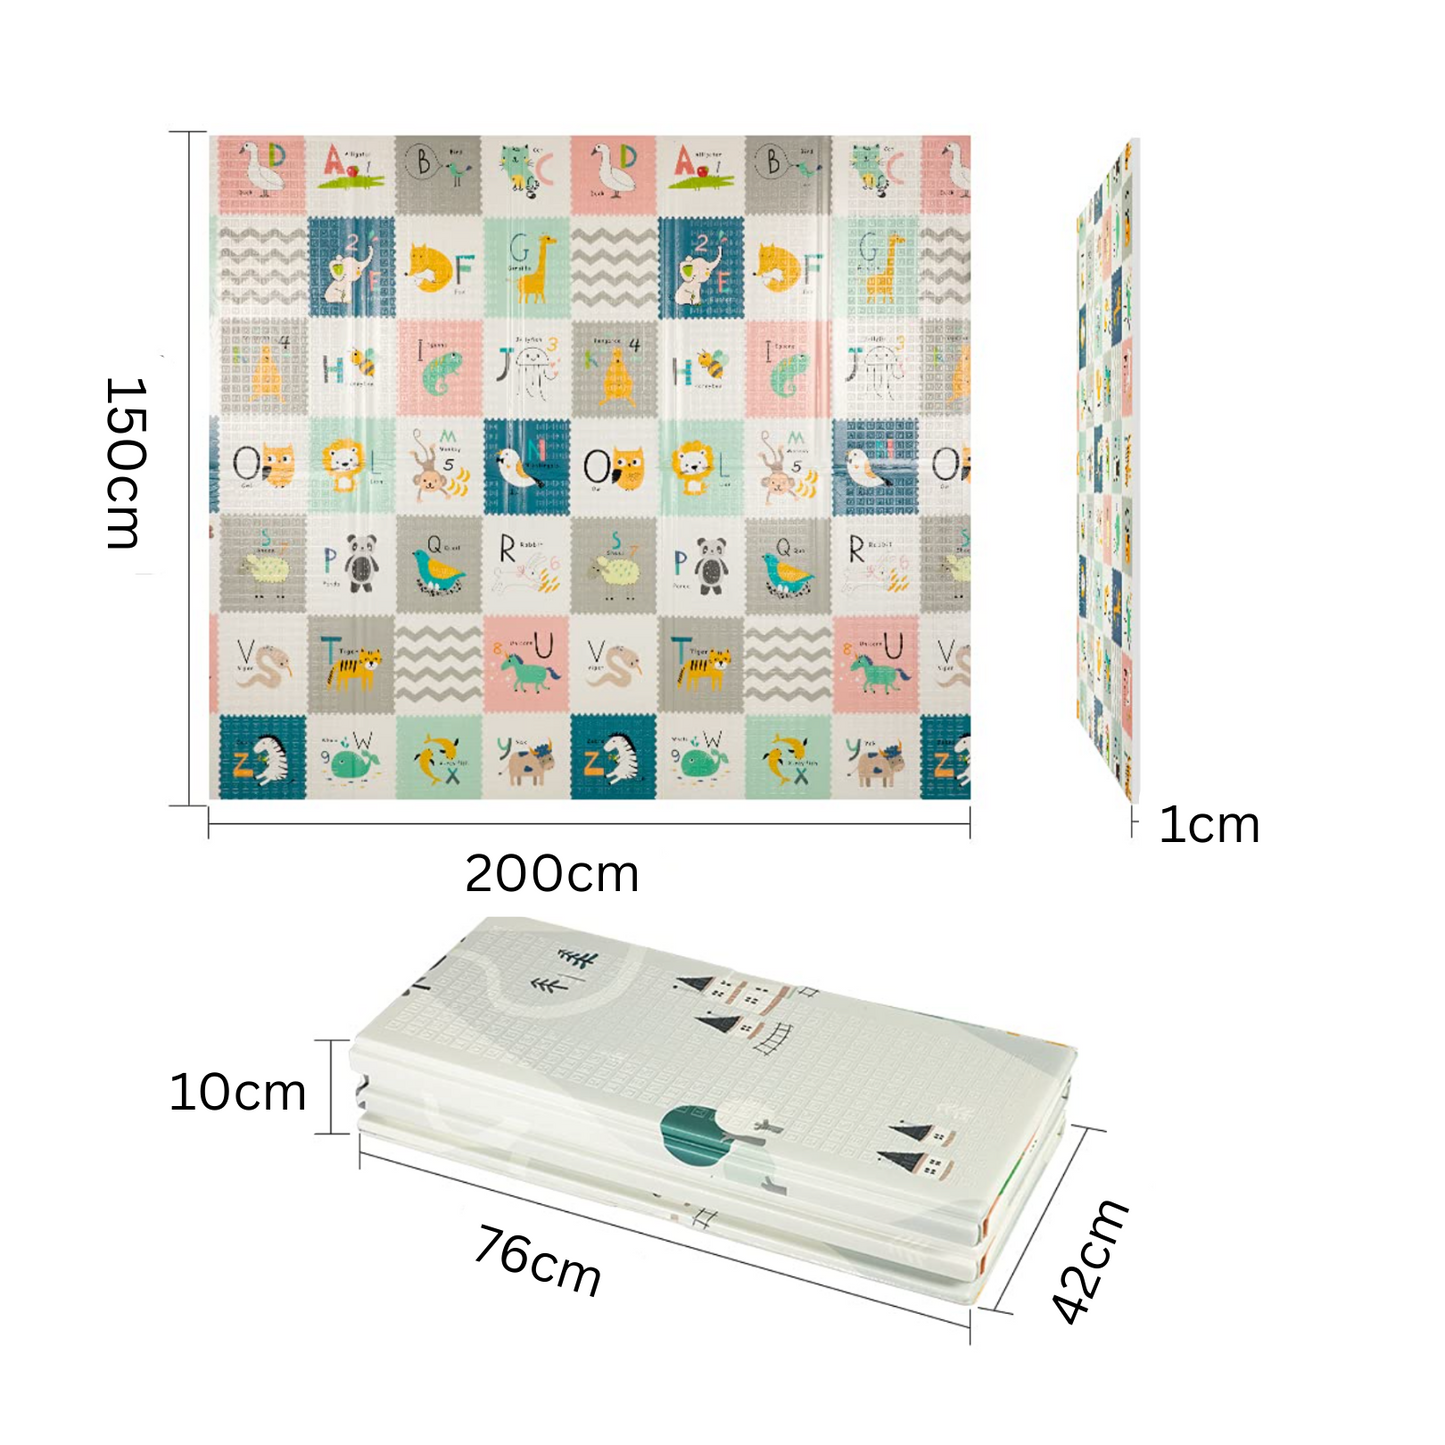 2m*1.5m*1cm - Foldable Baby Play Mat with Carry Bag - Road Map&123 Double Sides - (Thickness 1CM) - Waterproof Indoor Outdoor Use